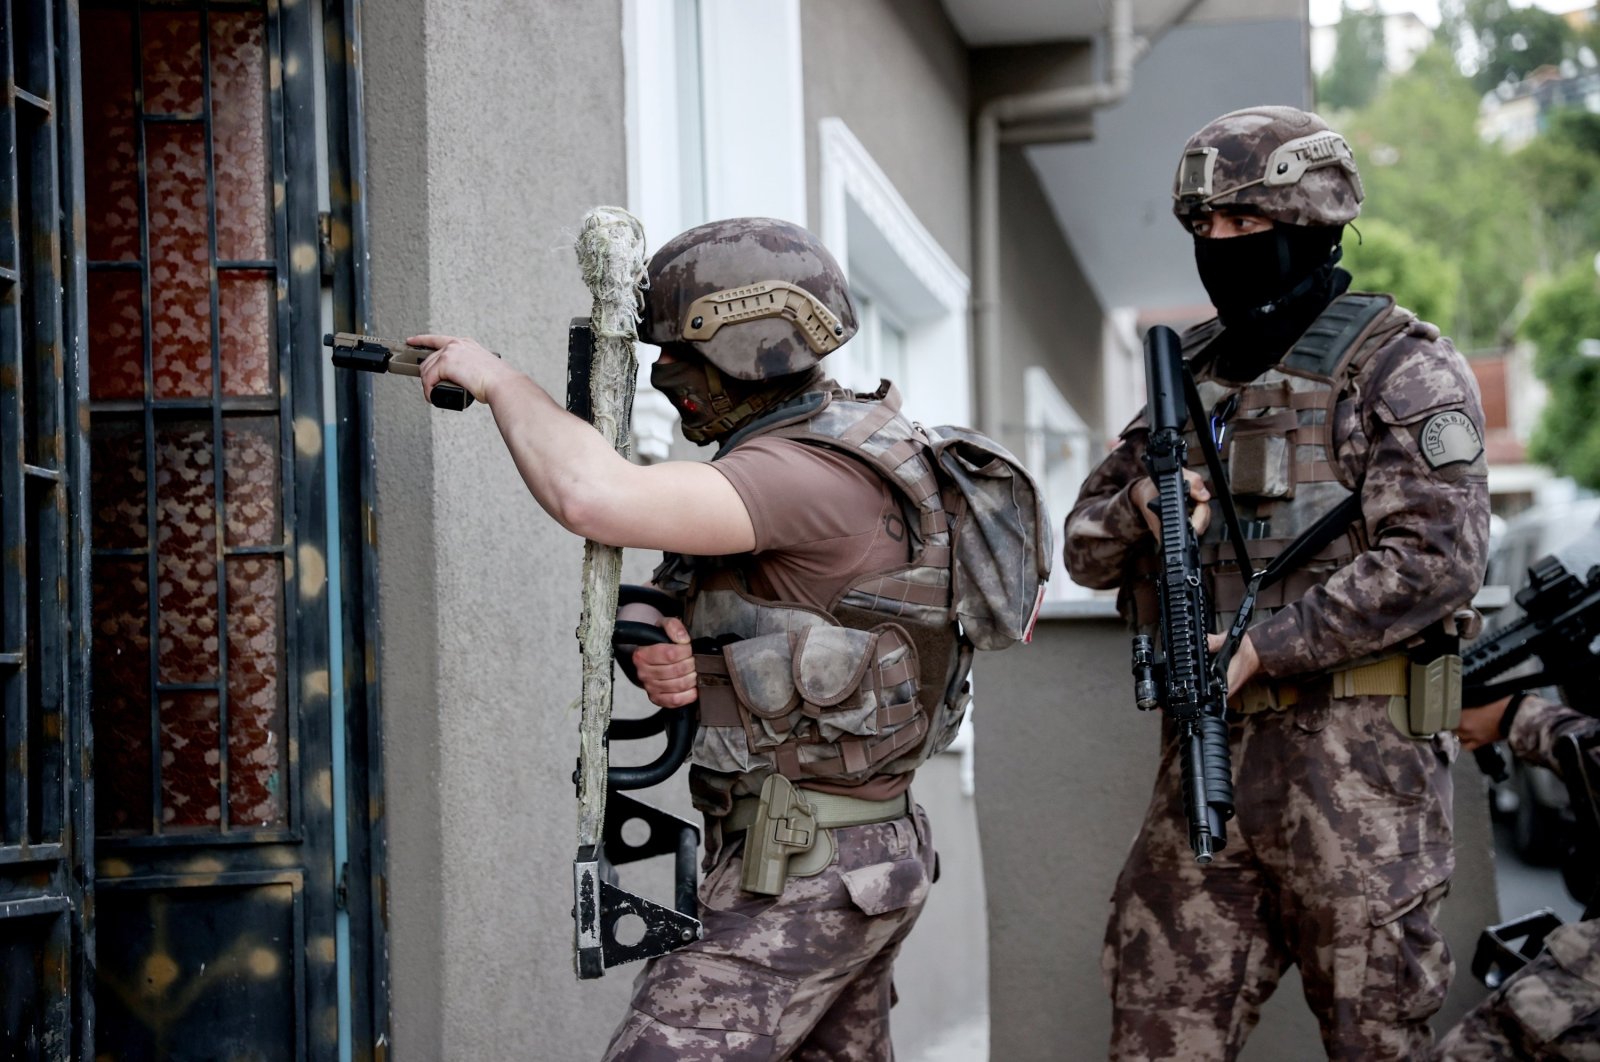 Turkish counterterrorism units enter a home during raids in an unspecified location in this undated file photo. (AA Photo)